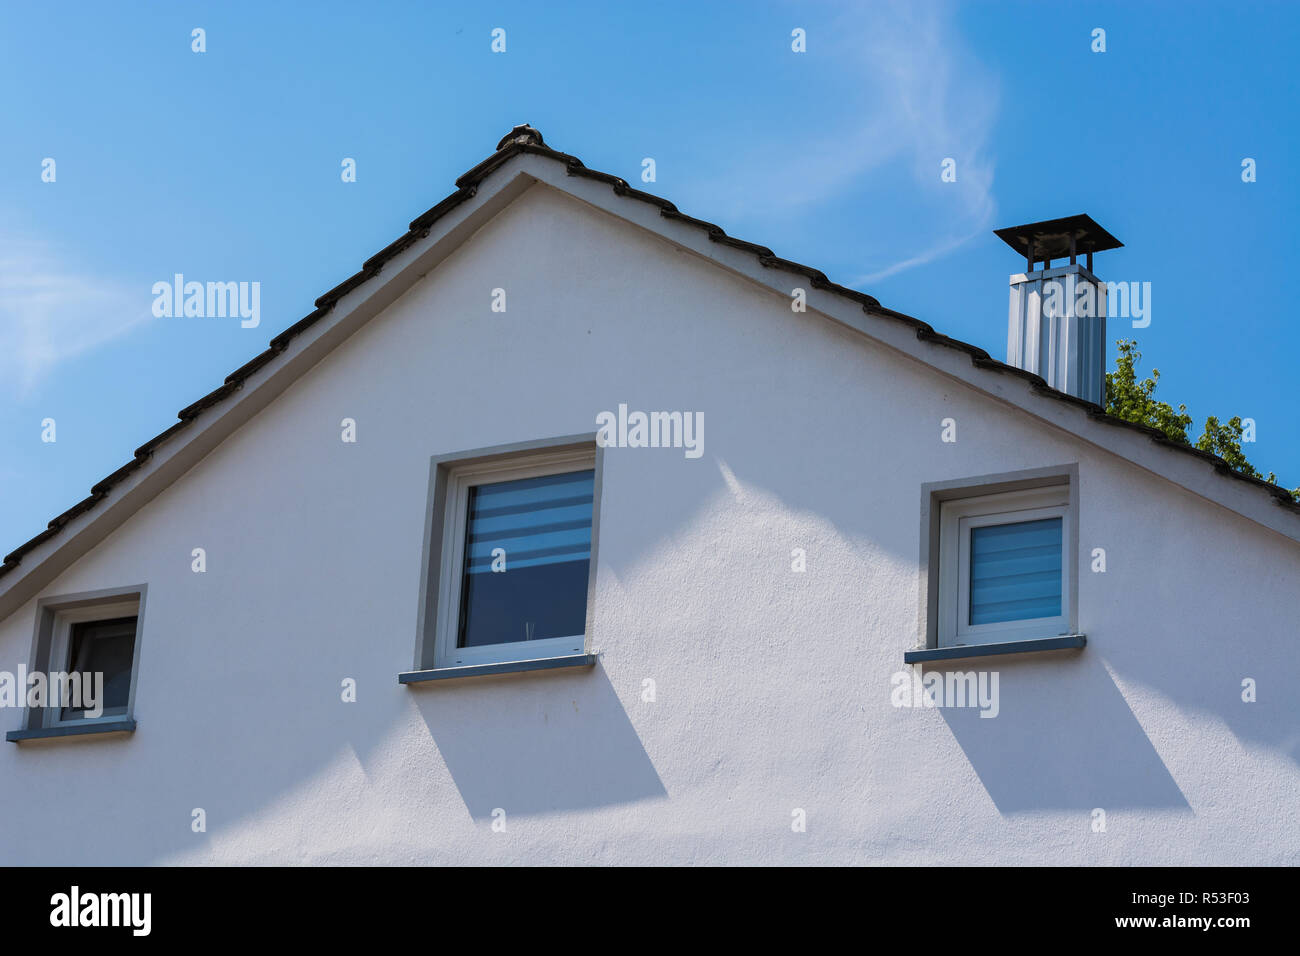 house facade in front of blue sky. Stock Photo